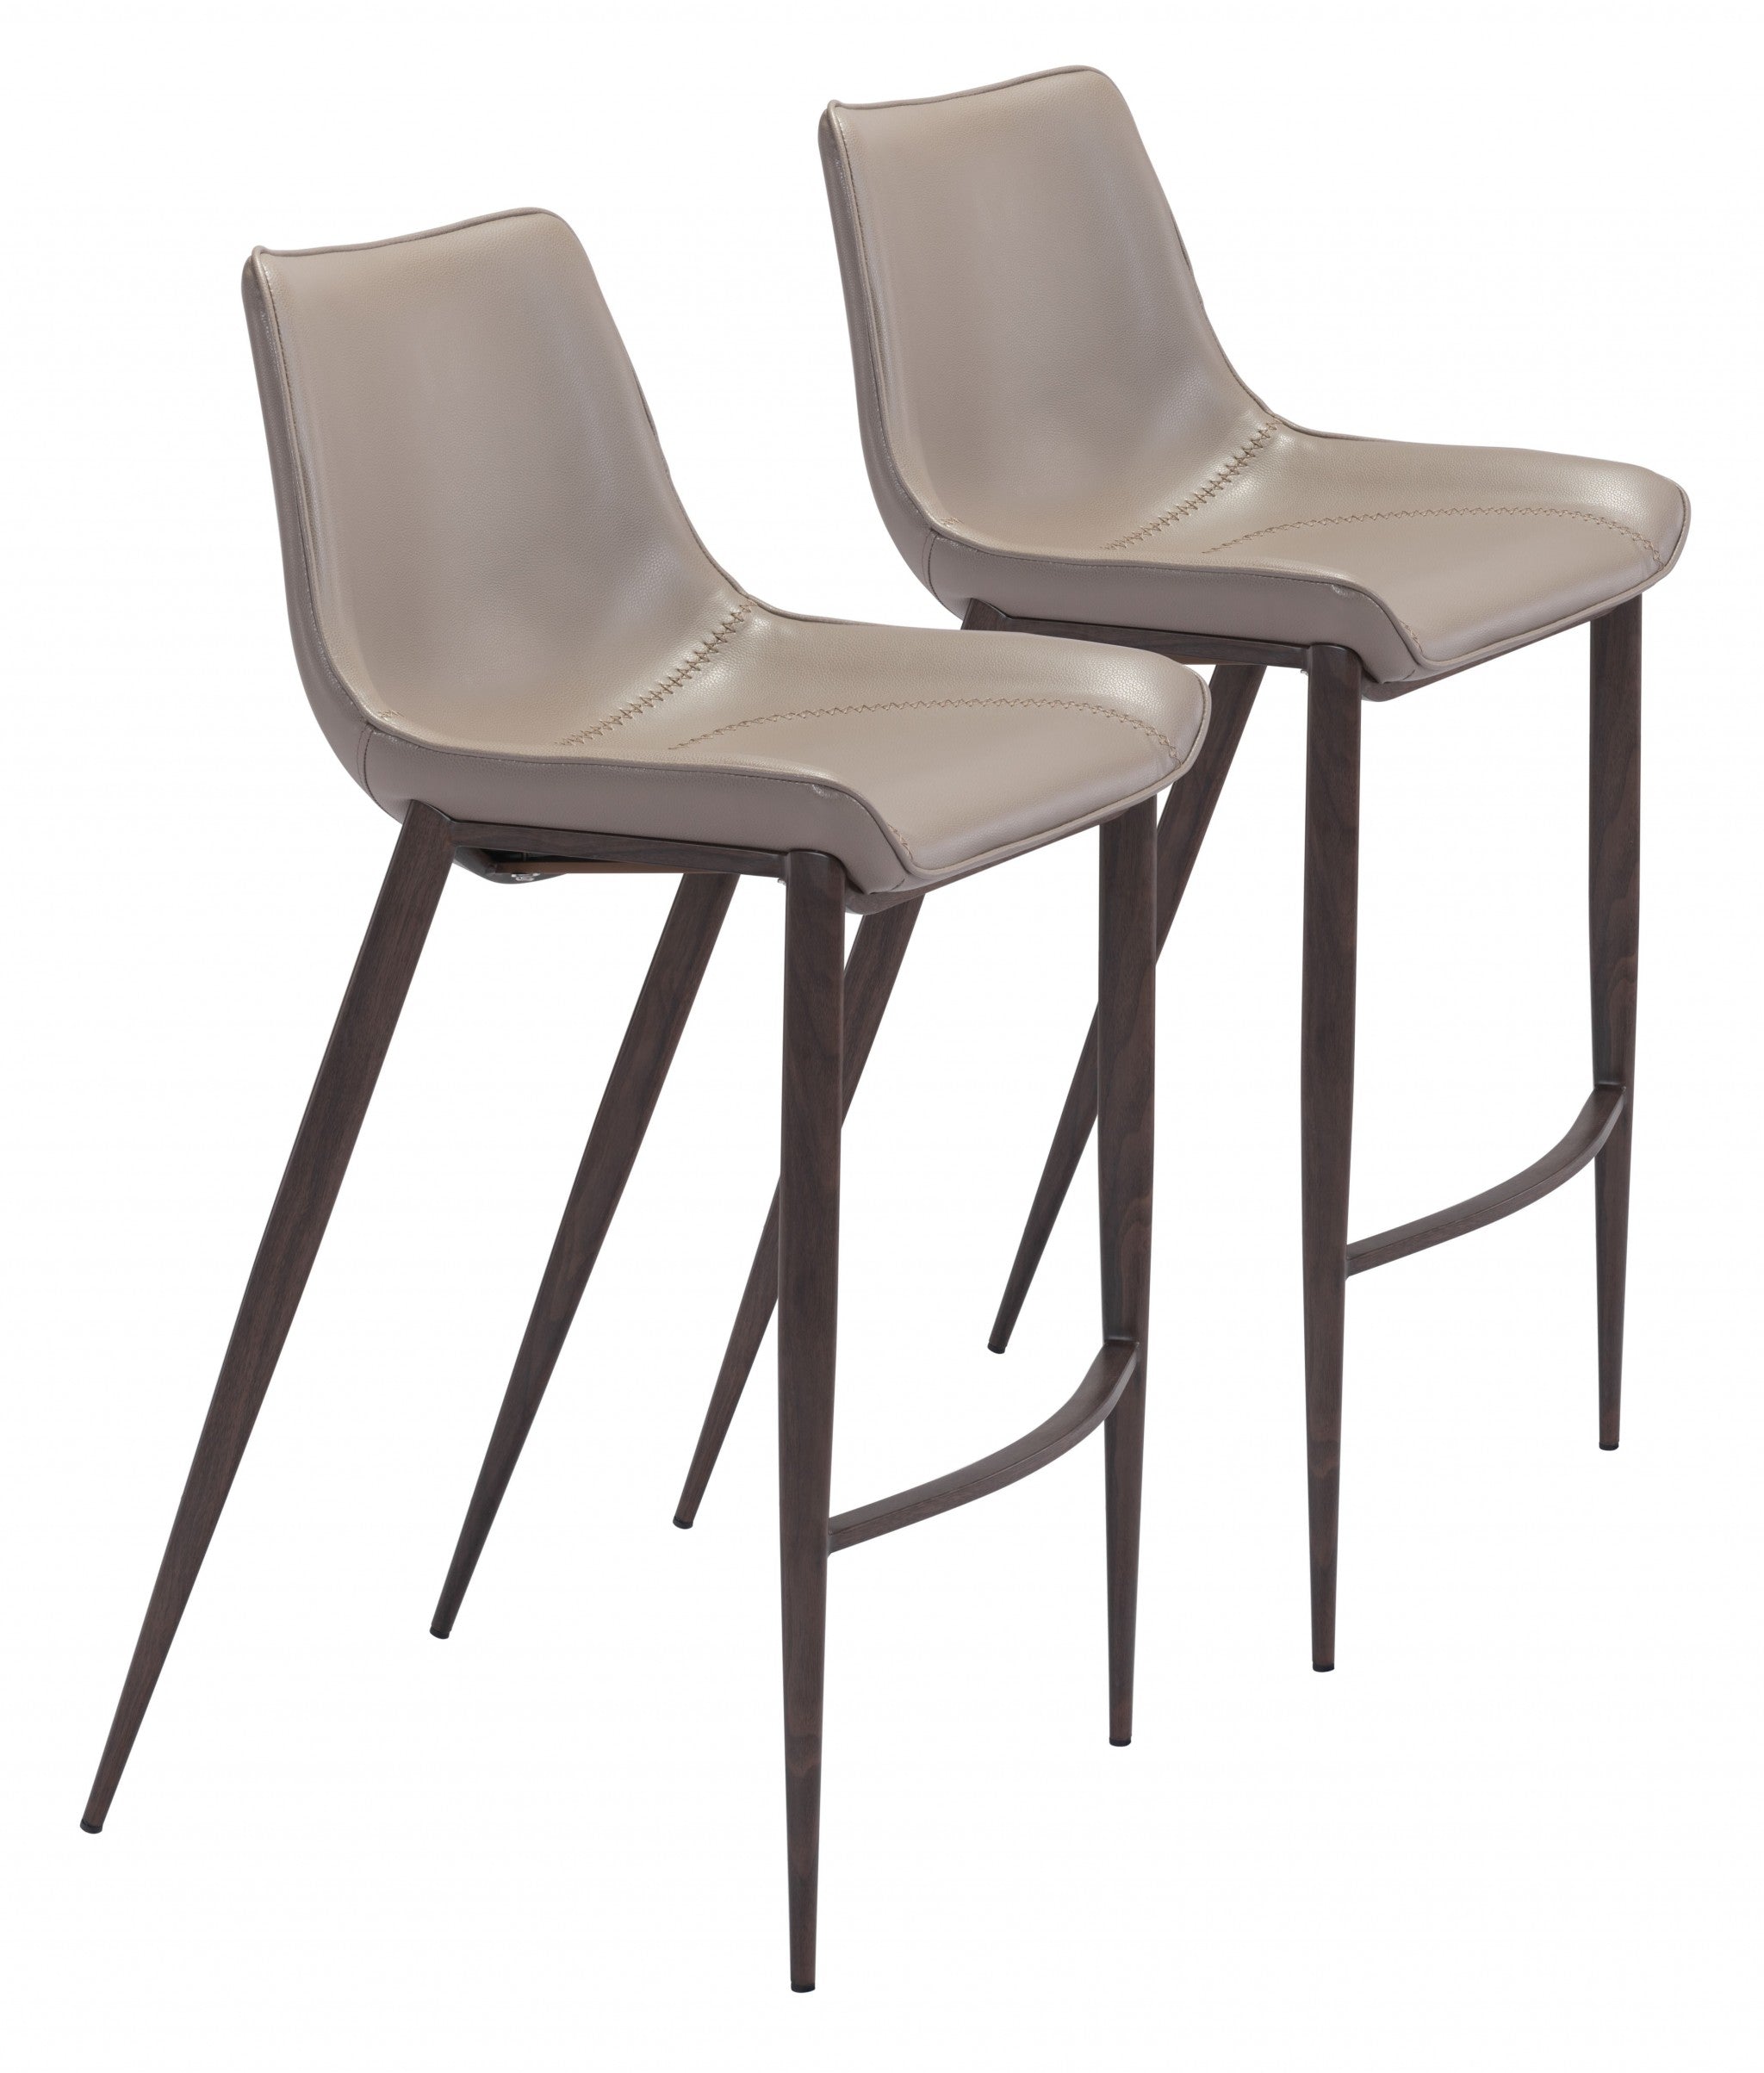 Set of Two 30" Gray And Brown Steel Low Back Bar Height Bar Chairs